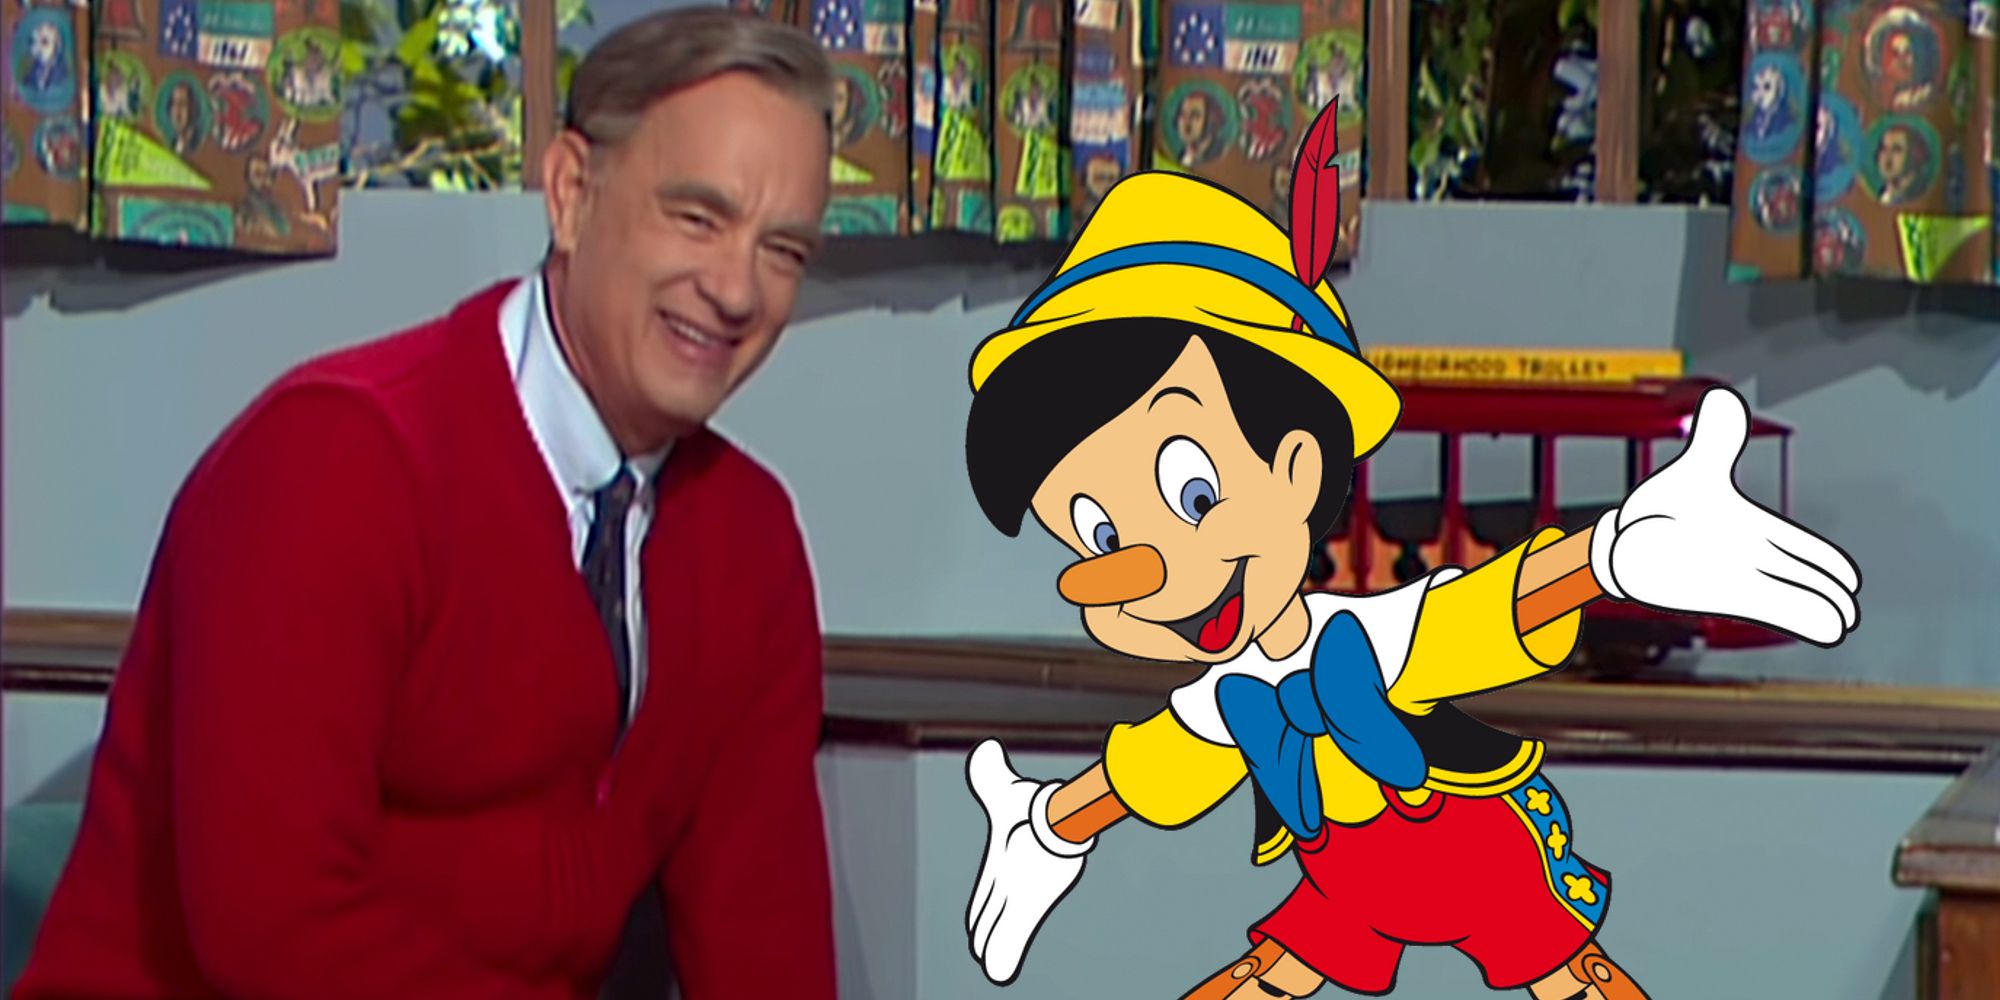 Tom Hanks’ Pinocchio LiveAction Movie Is Coming to Disney in 2022